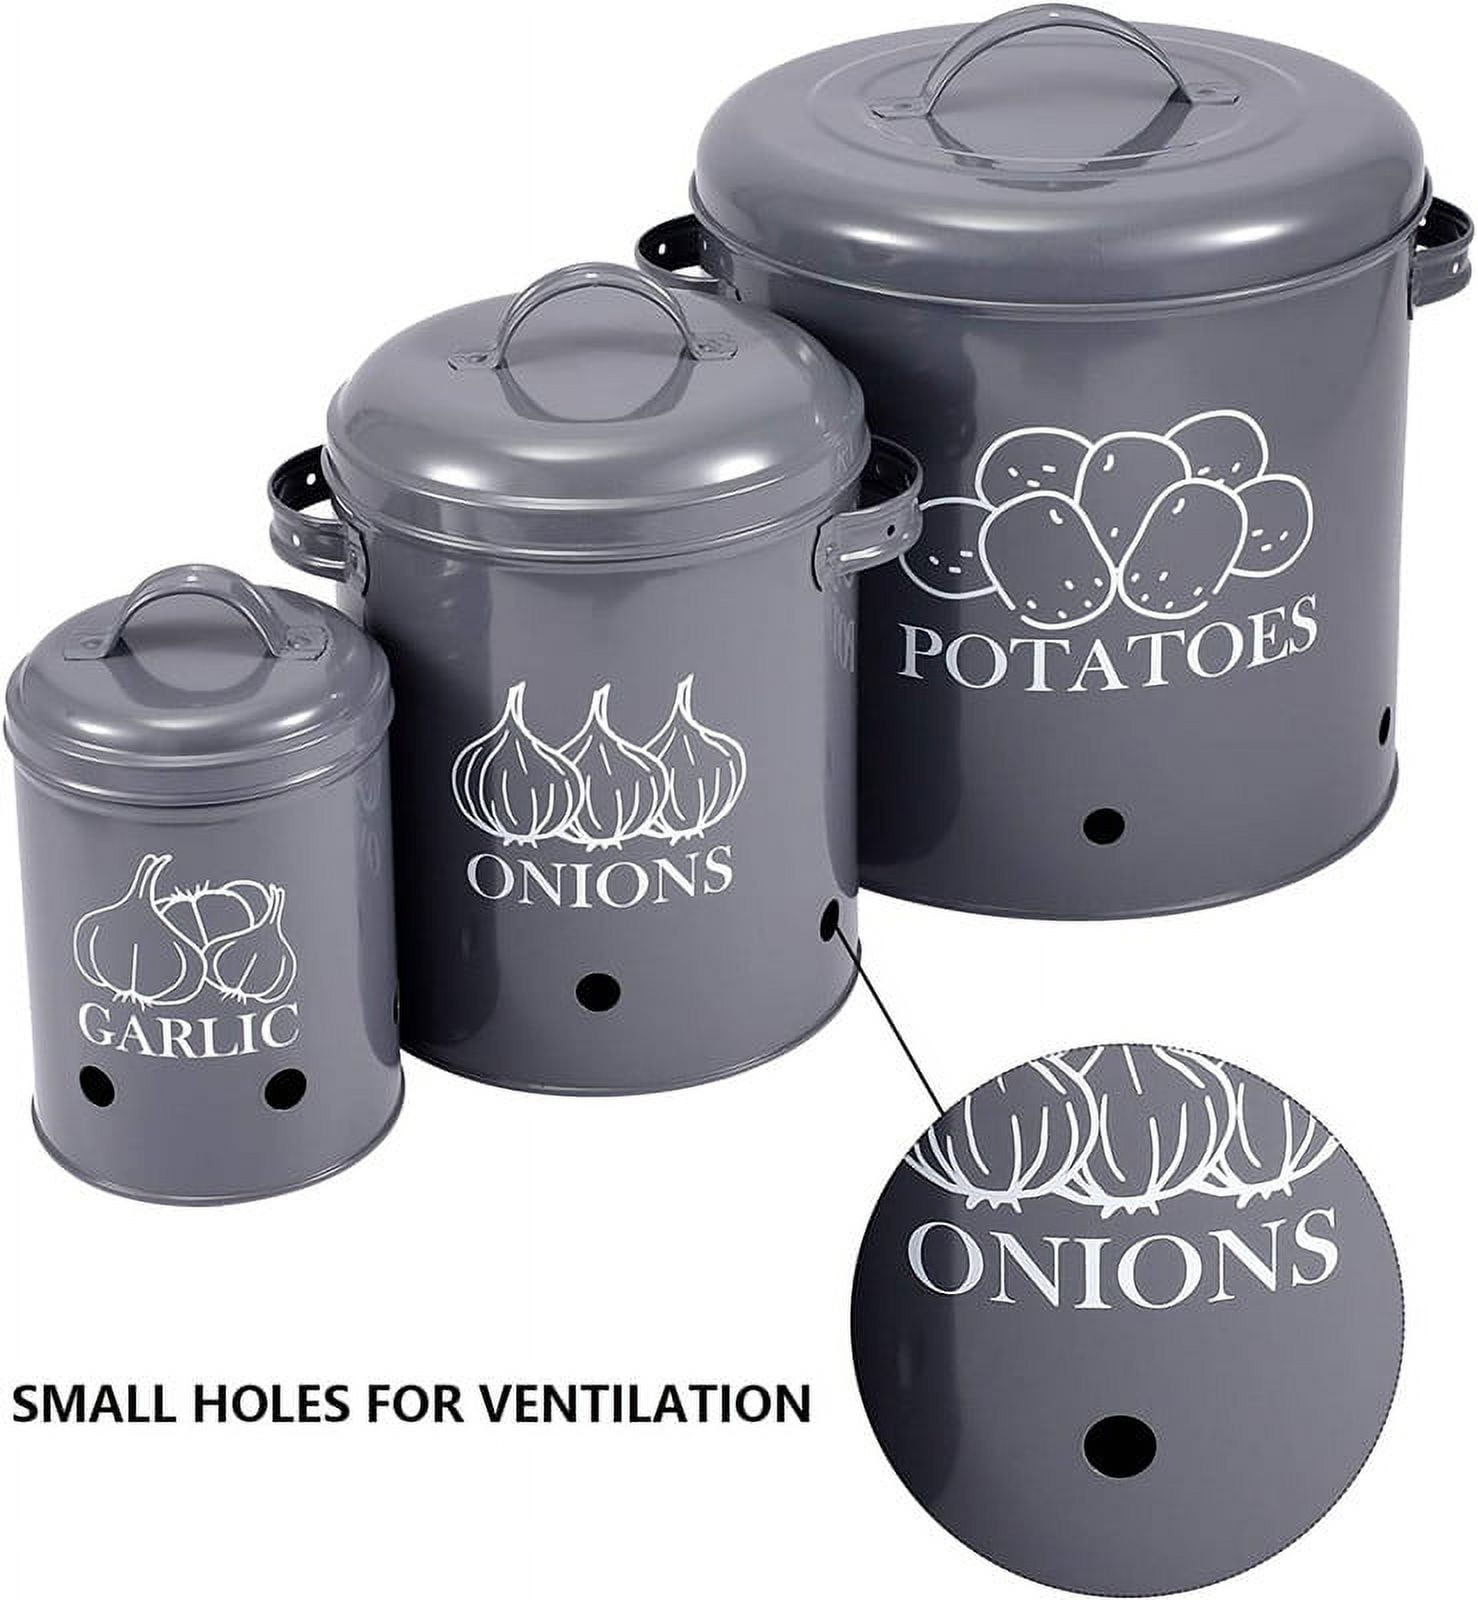 Kook Potato, Onion & Garlic Kitchen Storage Canisters, Rustic Farmhouse Containers with Aerating Holes, Vintage Vegetable Tins, Set of 3, 5 Liter, 2